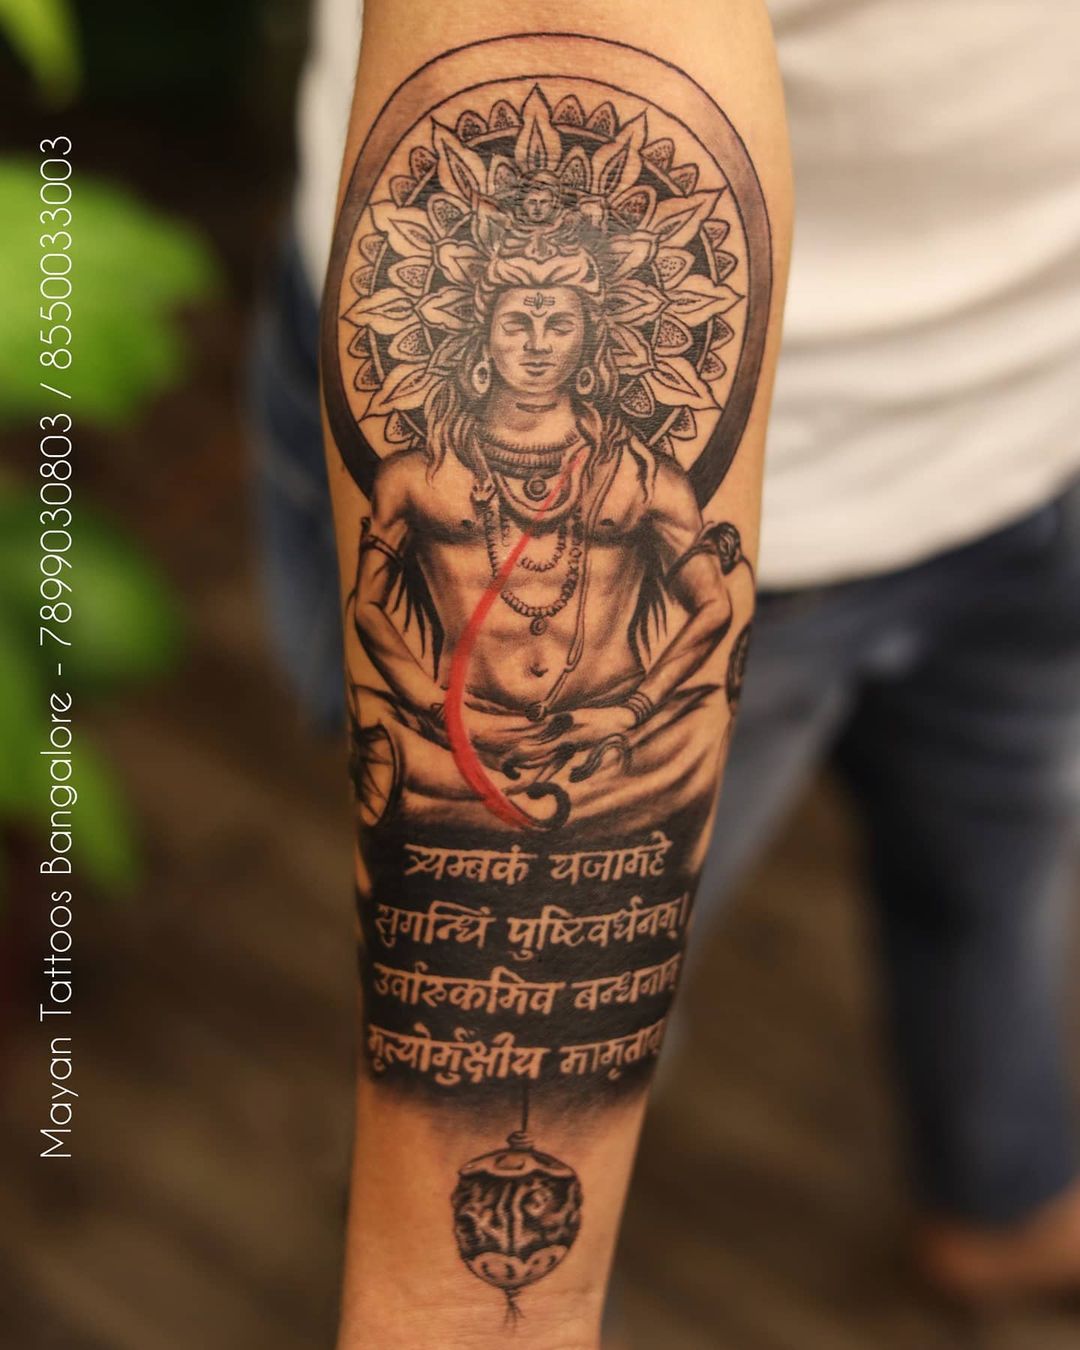 Youngistaan Tattoos on Instagram Check out this astonishing Lord Shiva  tattoo design by our star artist priyankayoungistaantattoos  This tattoo  symbolizes peace and